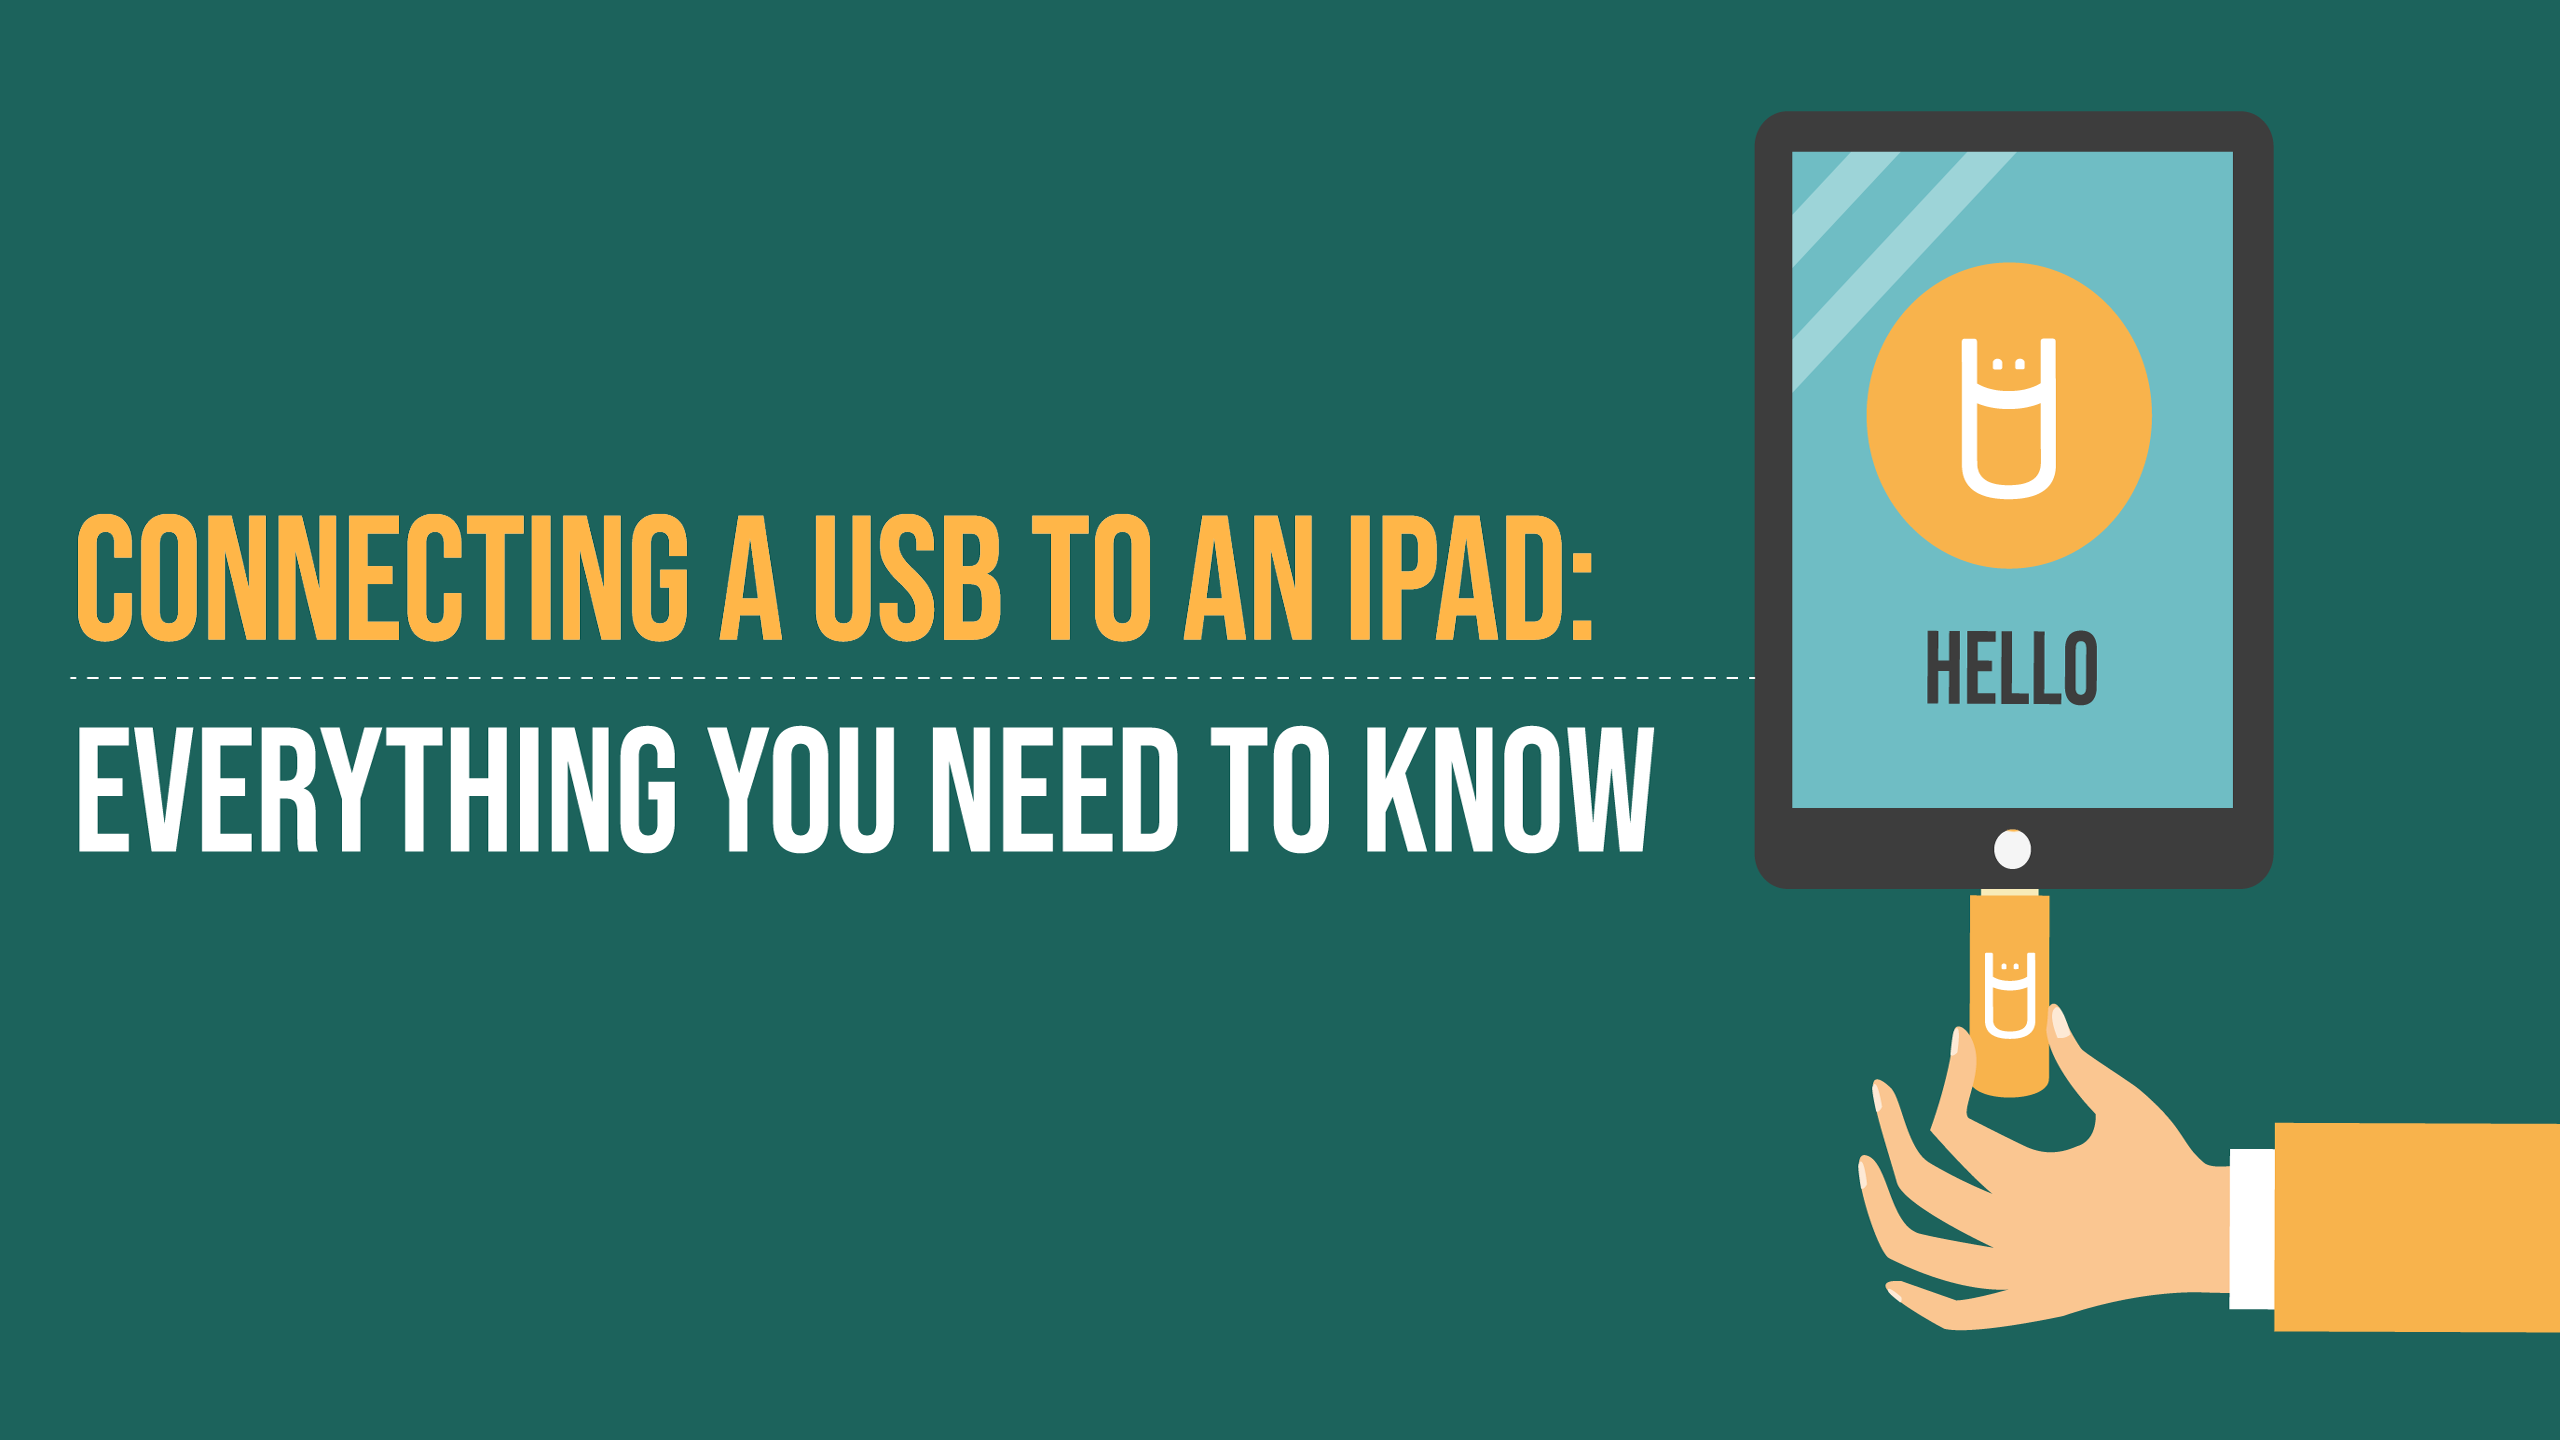 Connecting a USB to an iPad: Everything You Need to Know